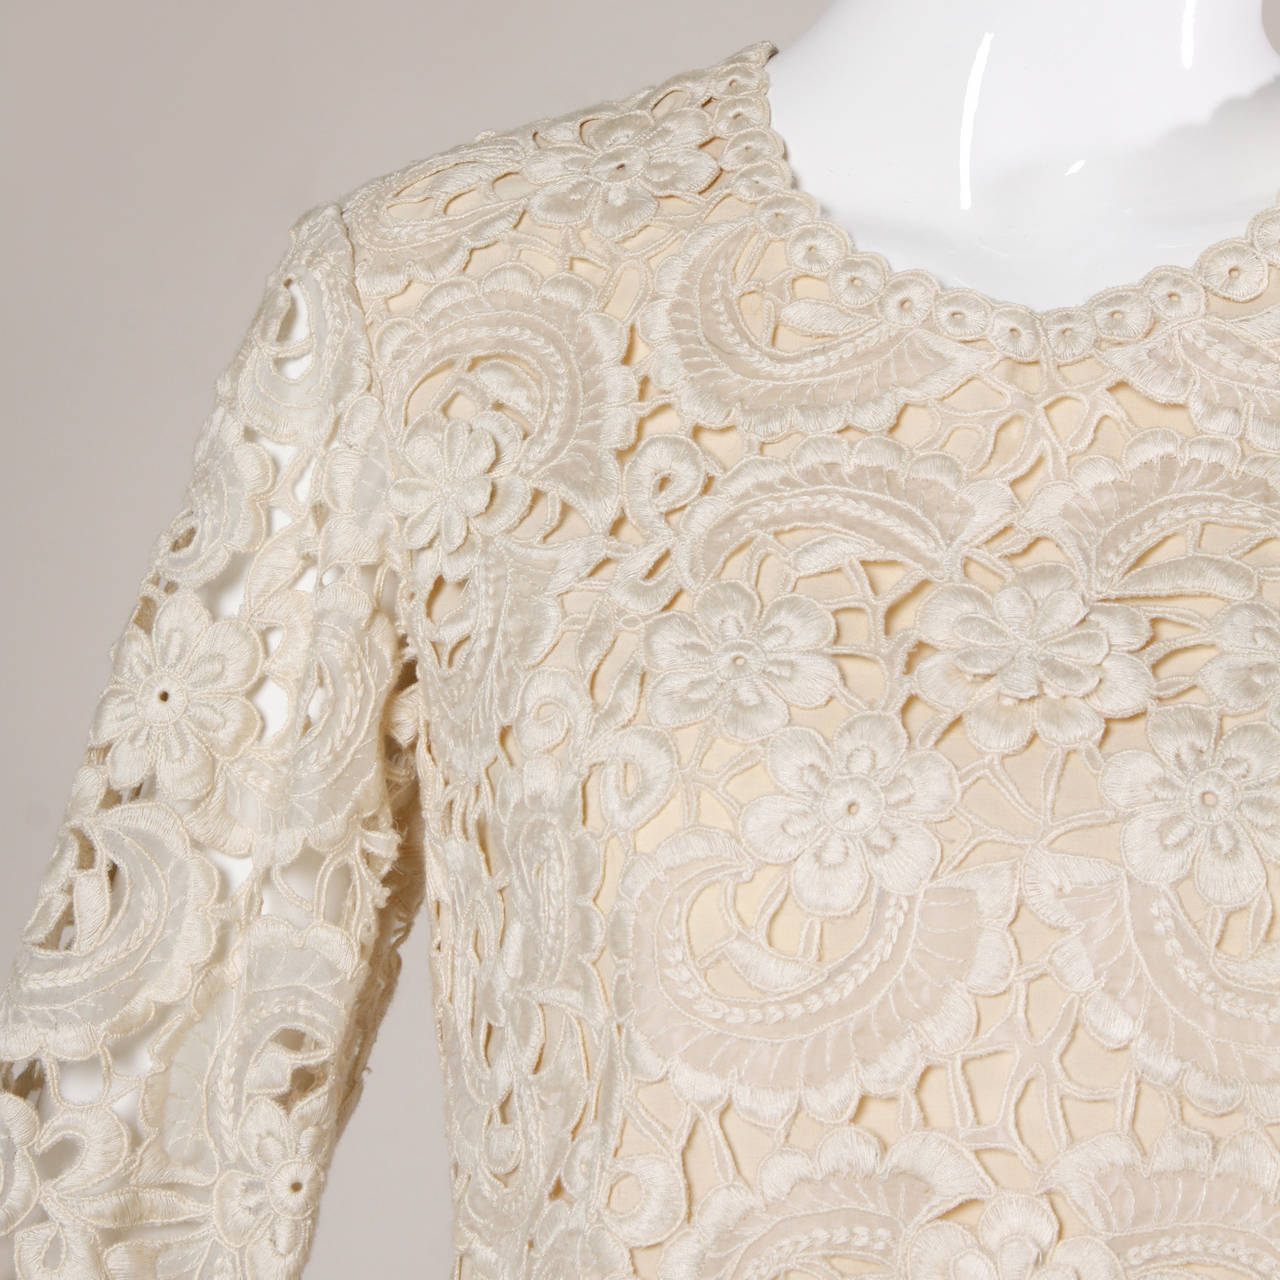 Vintage cutwork lace shift dress with an elaborate floral design and long sleeves.

Details:

Fully Lined
Back Zip and Snap Closure
Marked Size: Not Marked
Estimated Size: Small-Medium
Color: Beige
Fabric: 65% Tetoron/ 35% Cotton
Label: